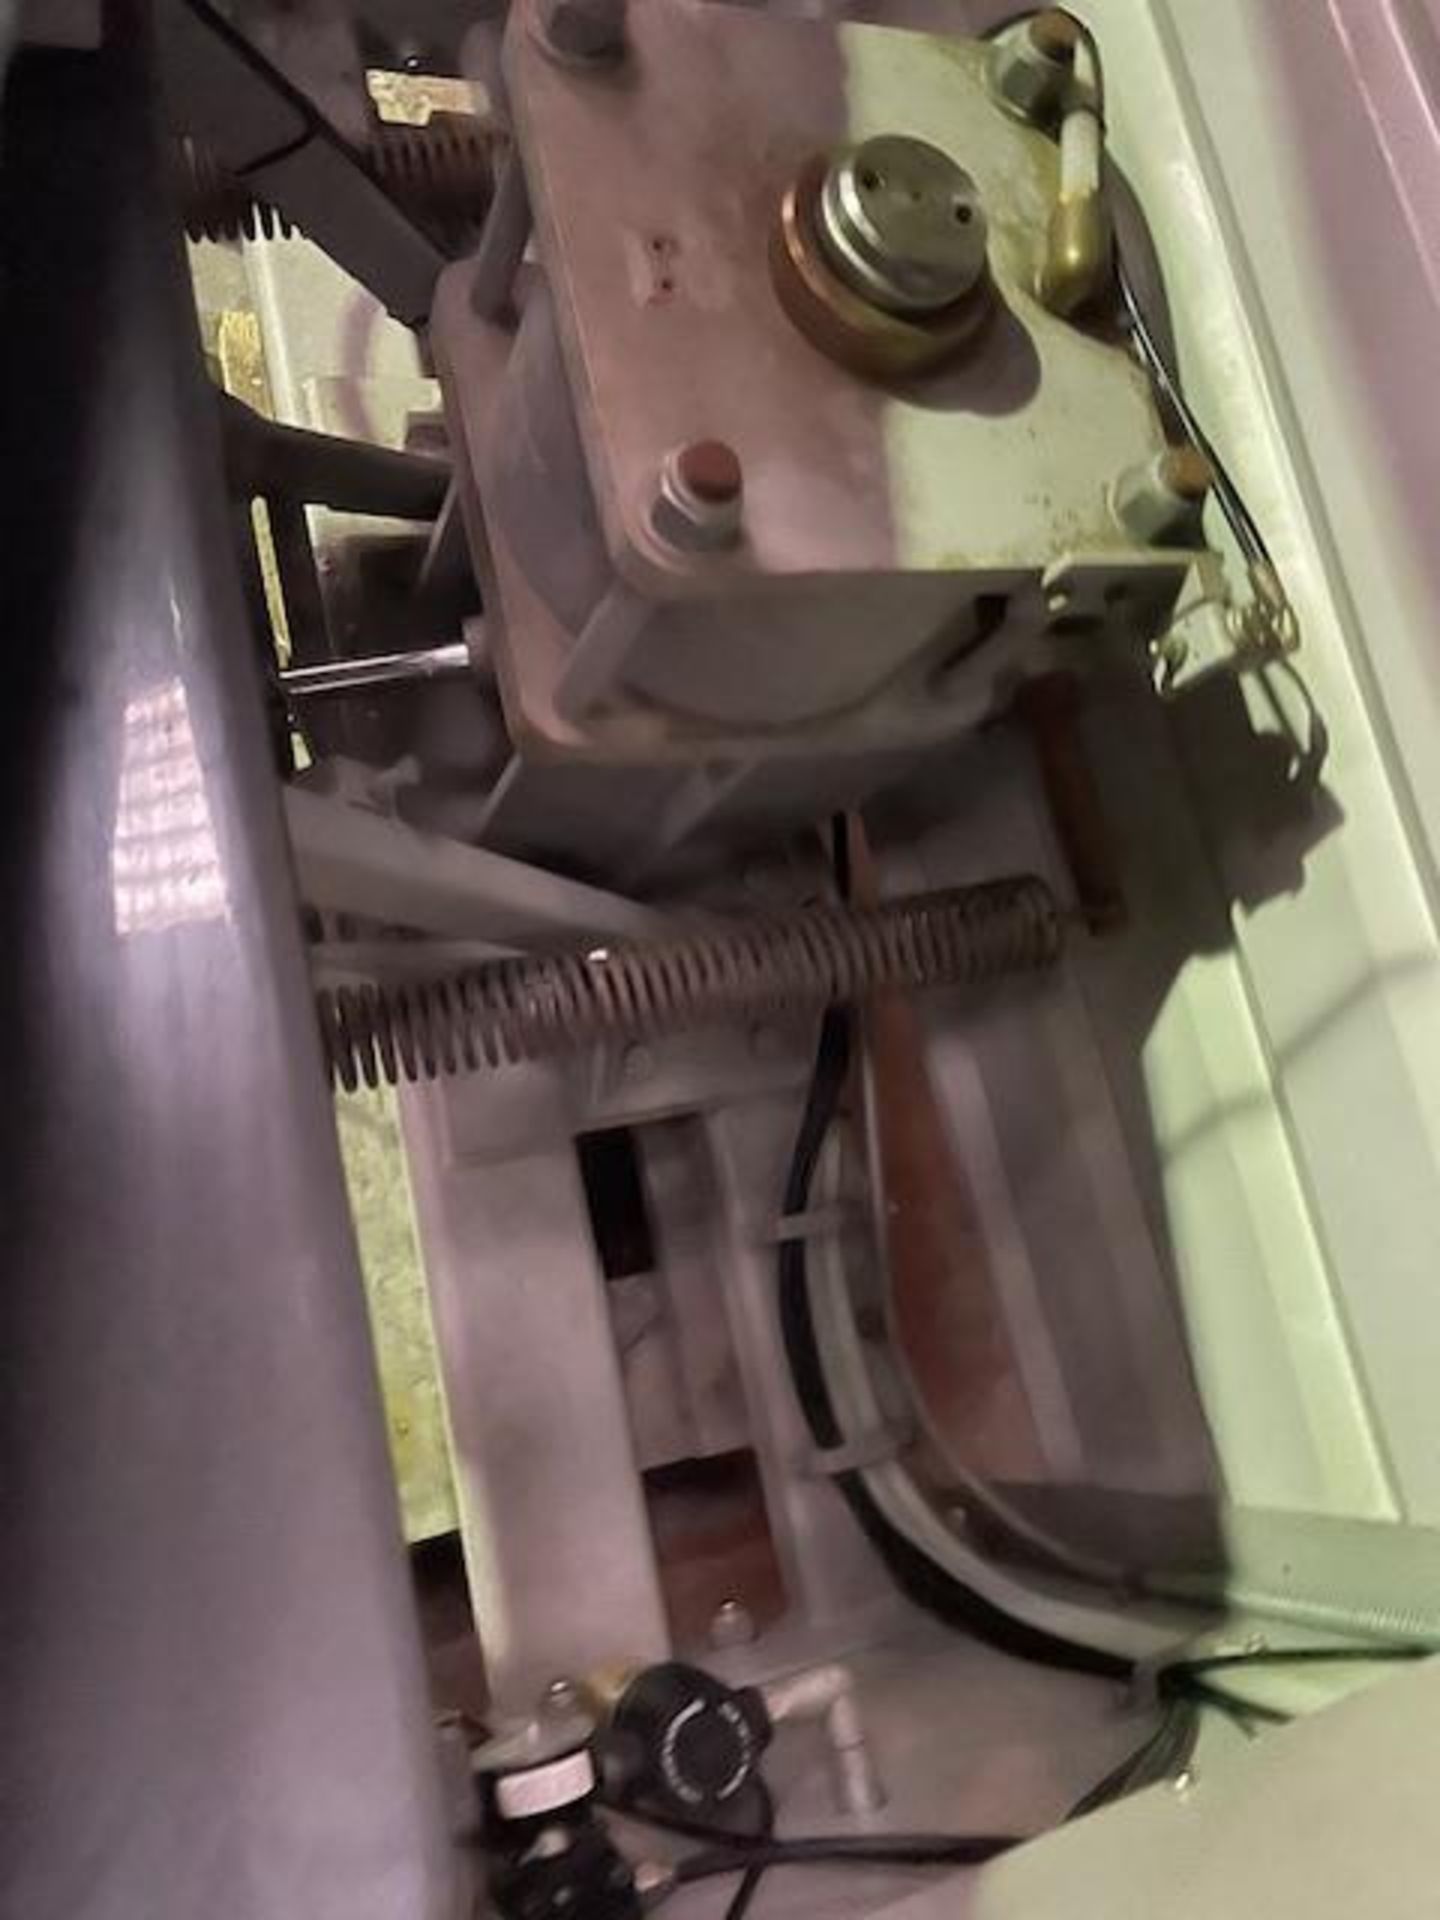 Laundry press it’s a BMM Weston it’s 3 phase electric it’s in good condition and it’s a commercial - Bild 5 aus 7